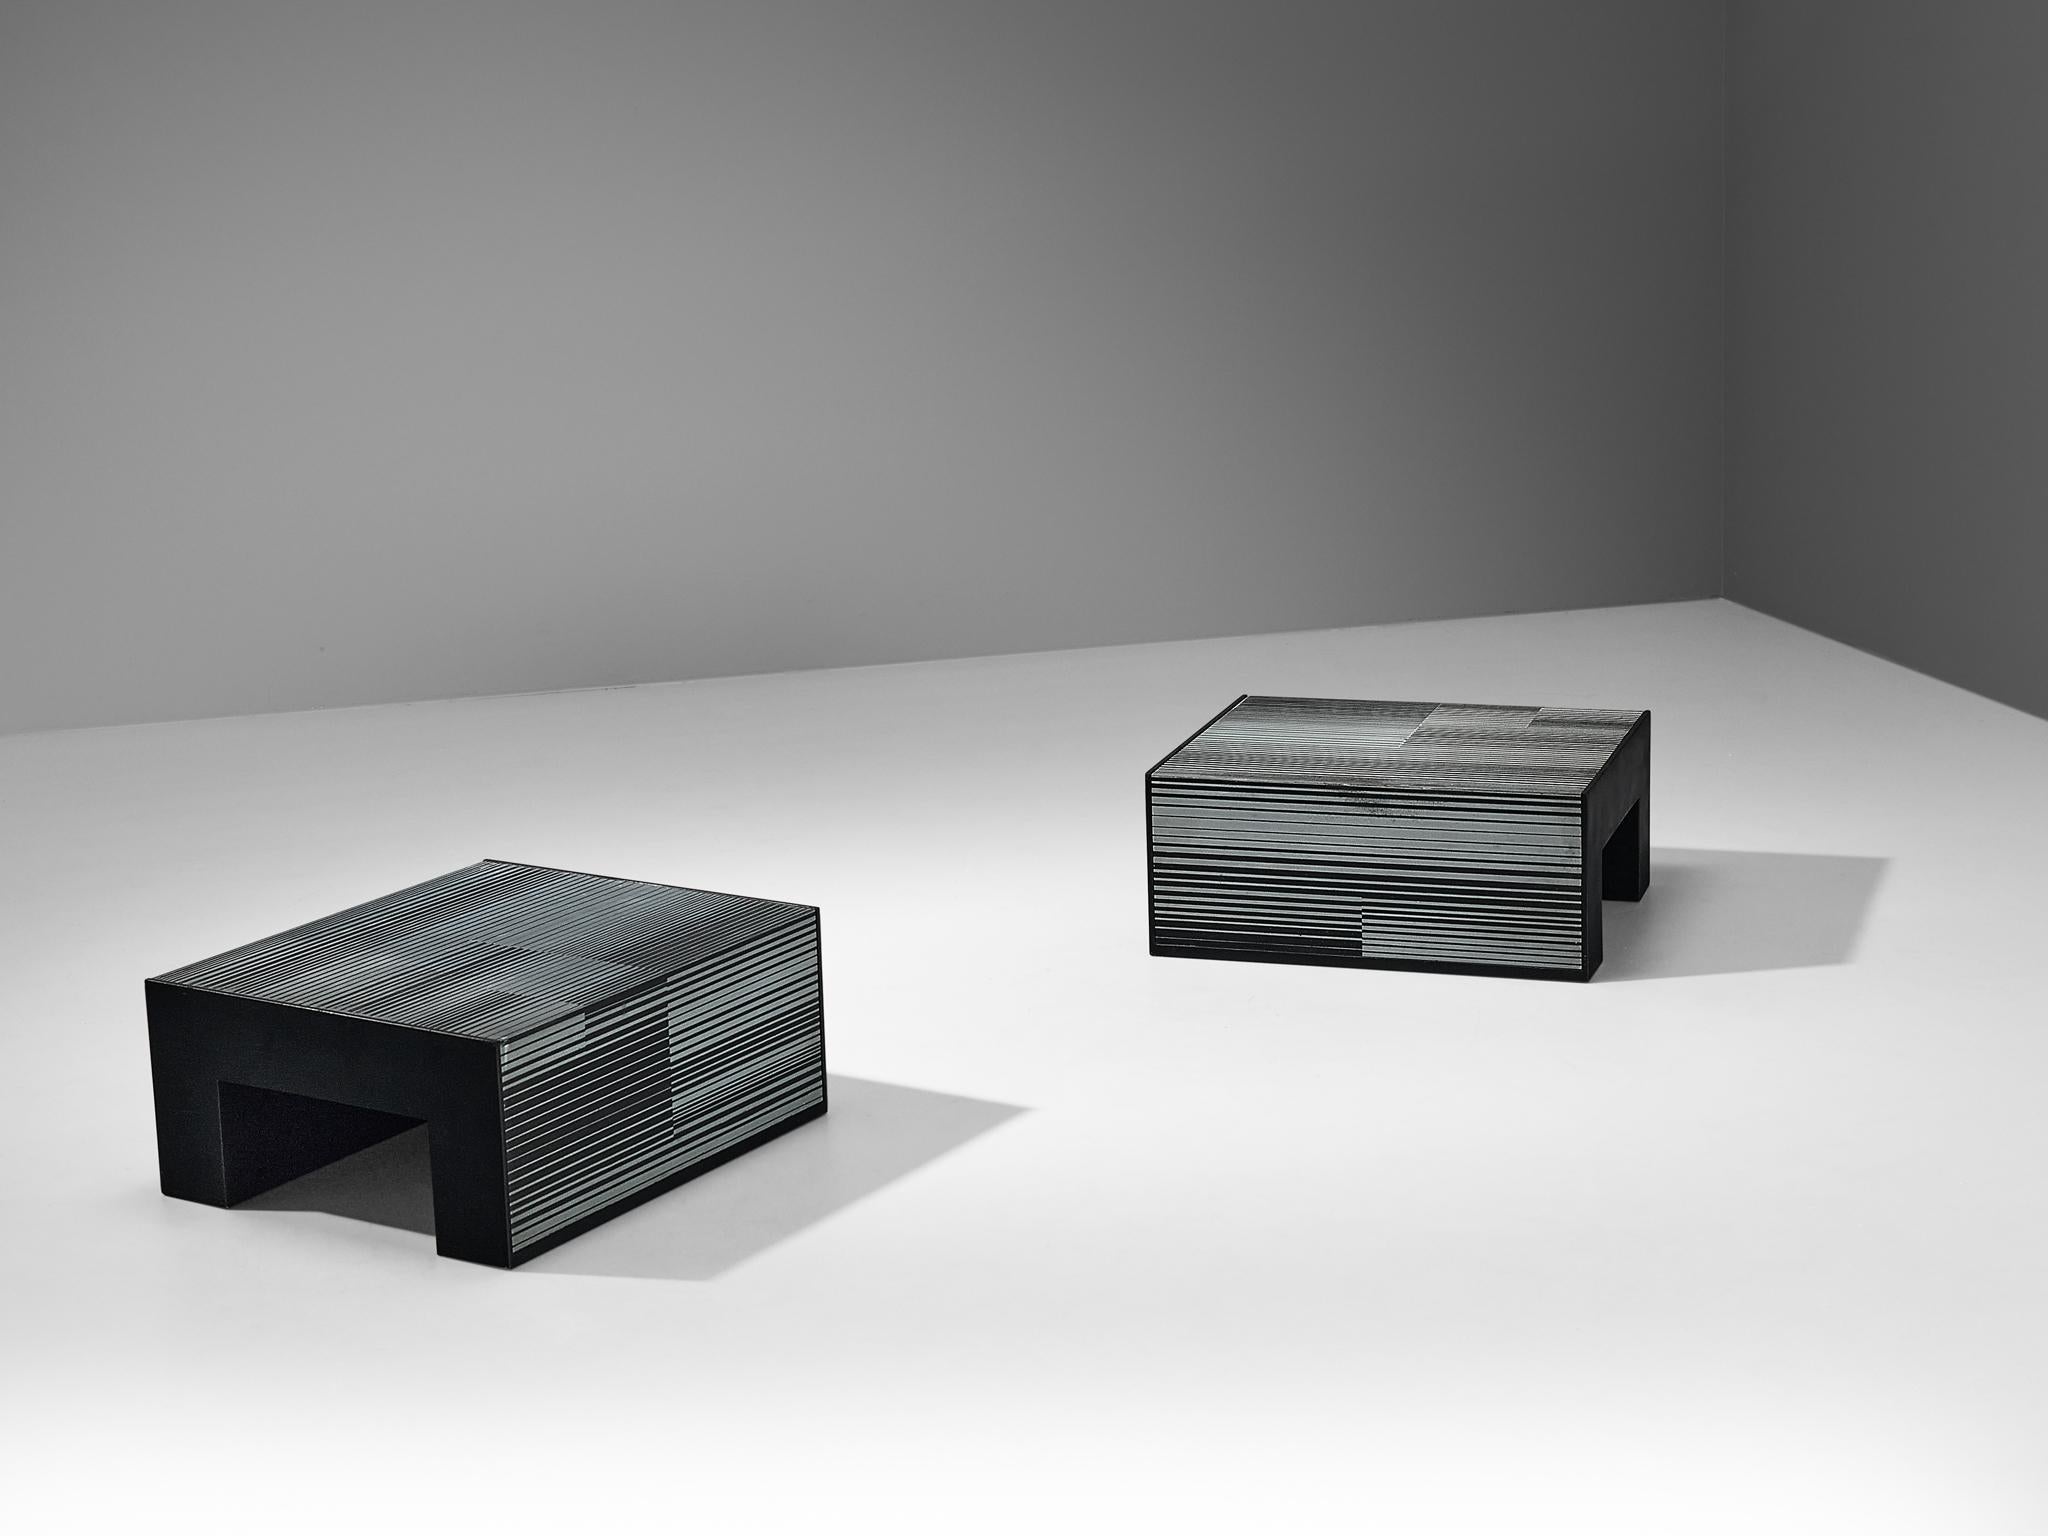 Giovanni Ceccarelli and Gianni Patuzzi for Gruppo NP2, pair of coffee tables, black enameled wood, zinc, Italy, circa 1975

These coffee or side tables, created by the renowned Gruppo NP2, have a compelling and interesting design. The tables are